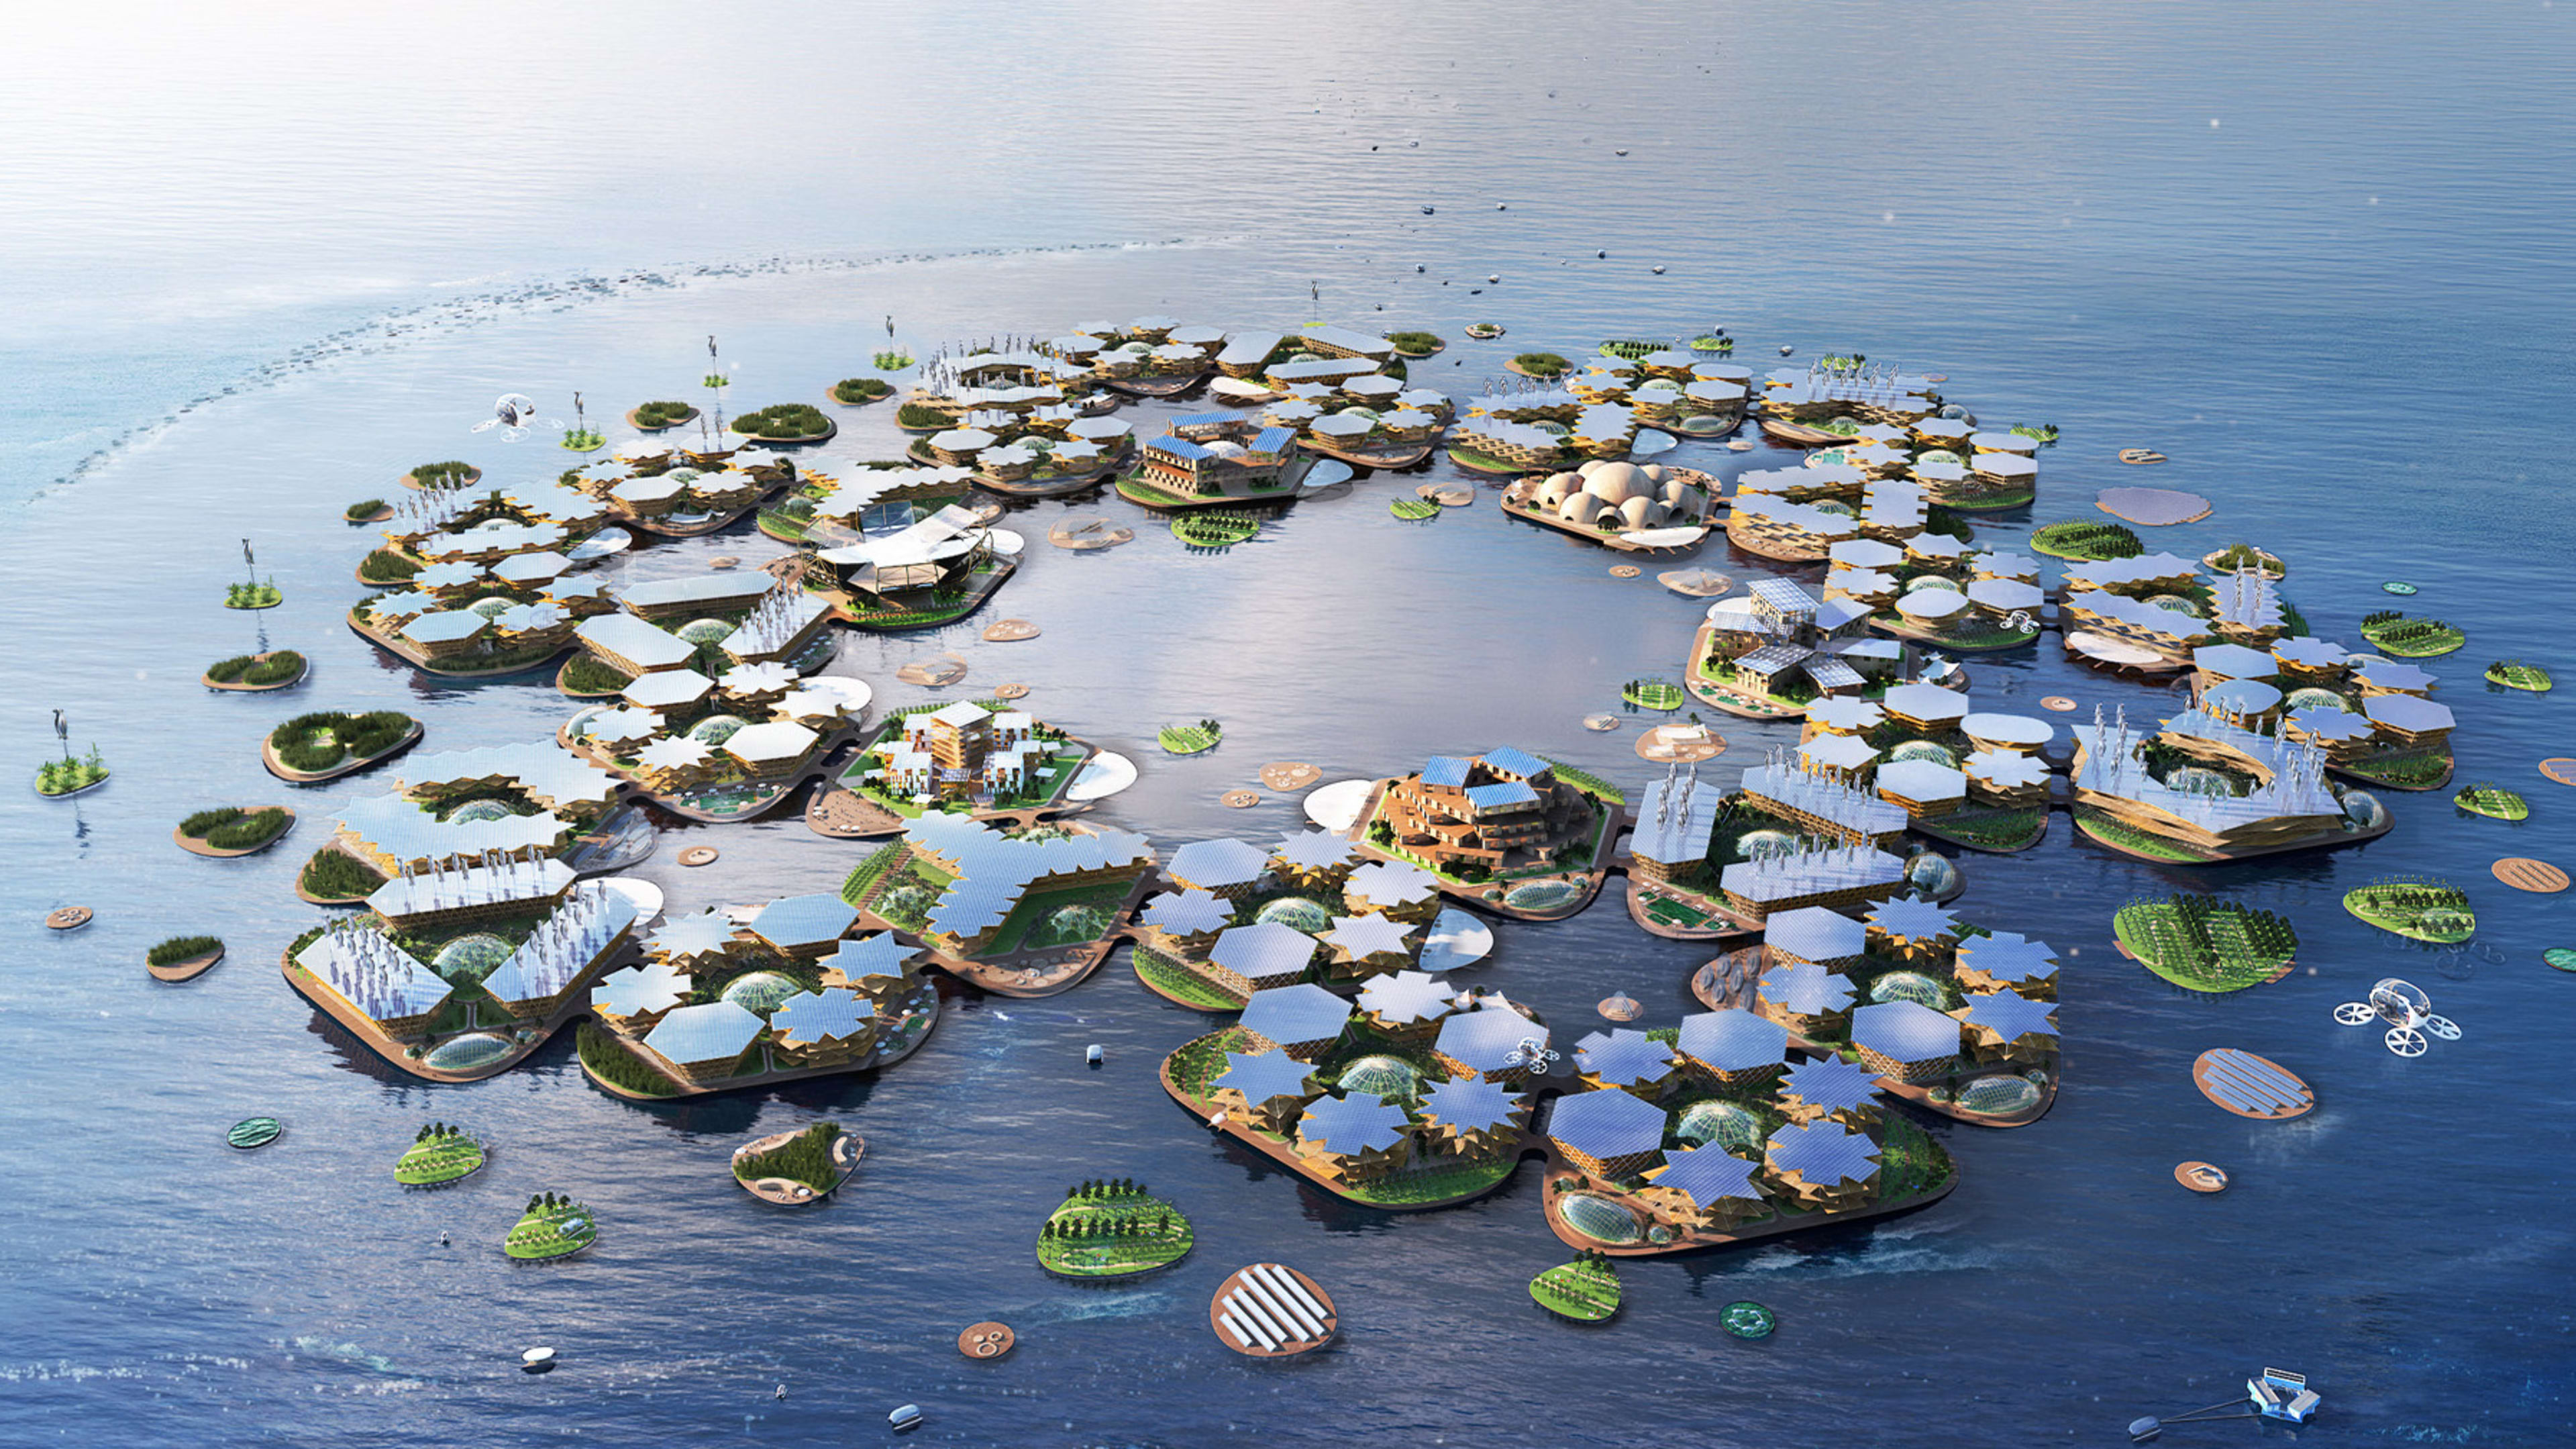 Floating cities once seemed like sci-fi. Now the UN is getting on board